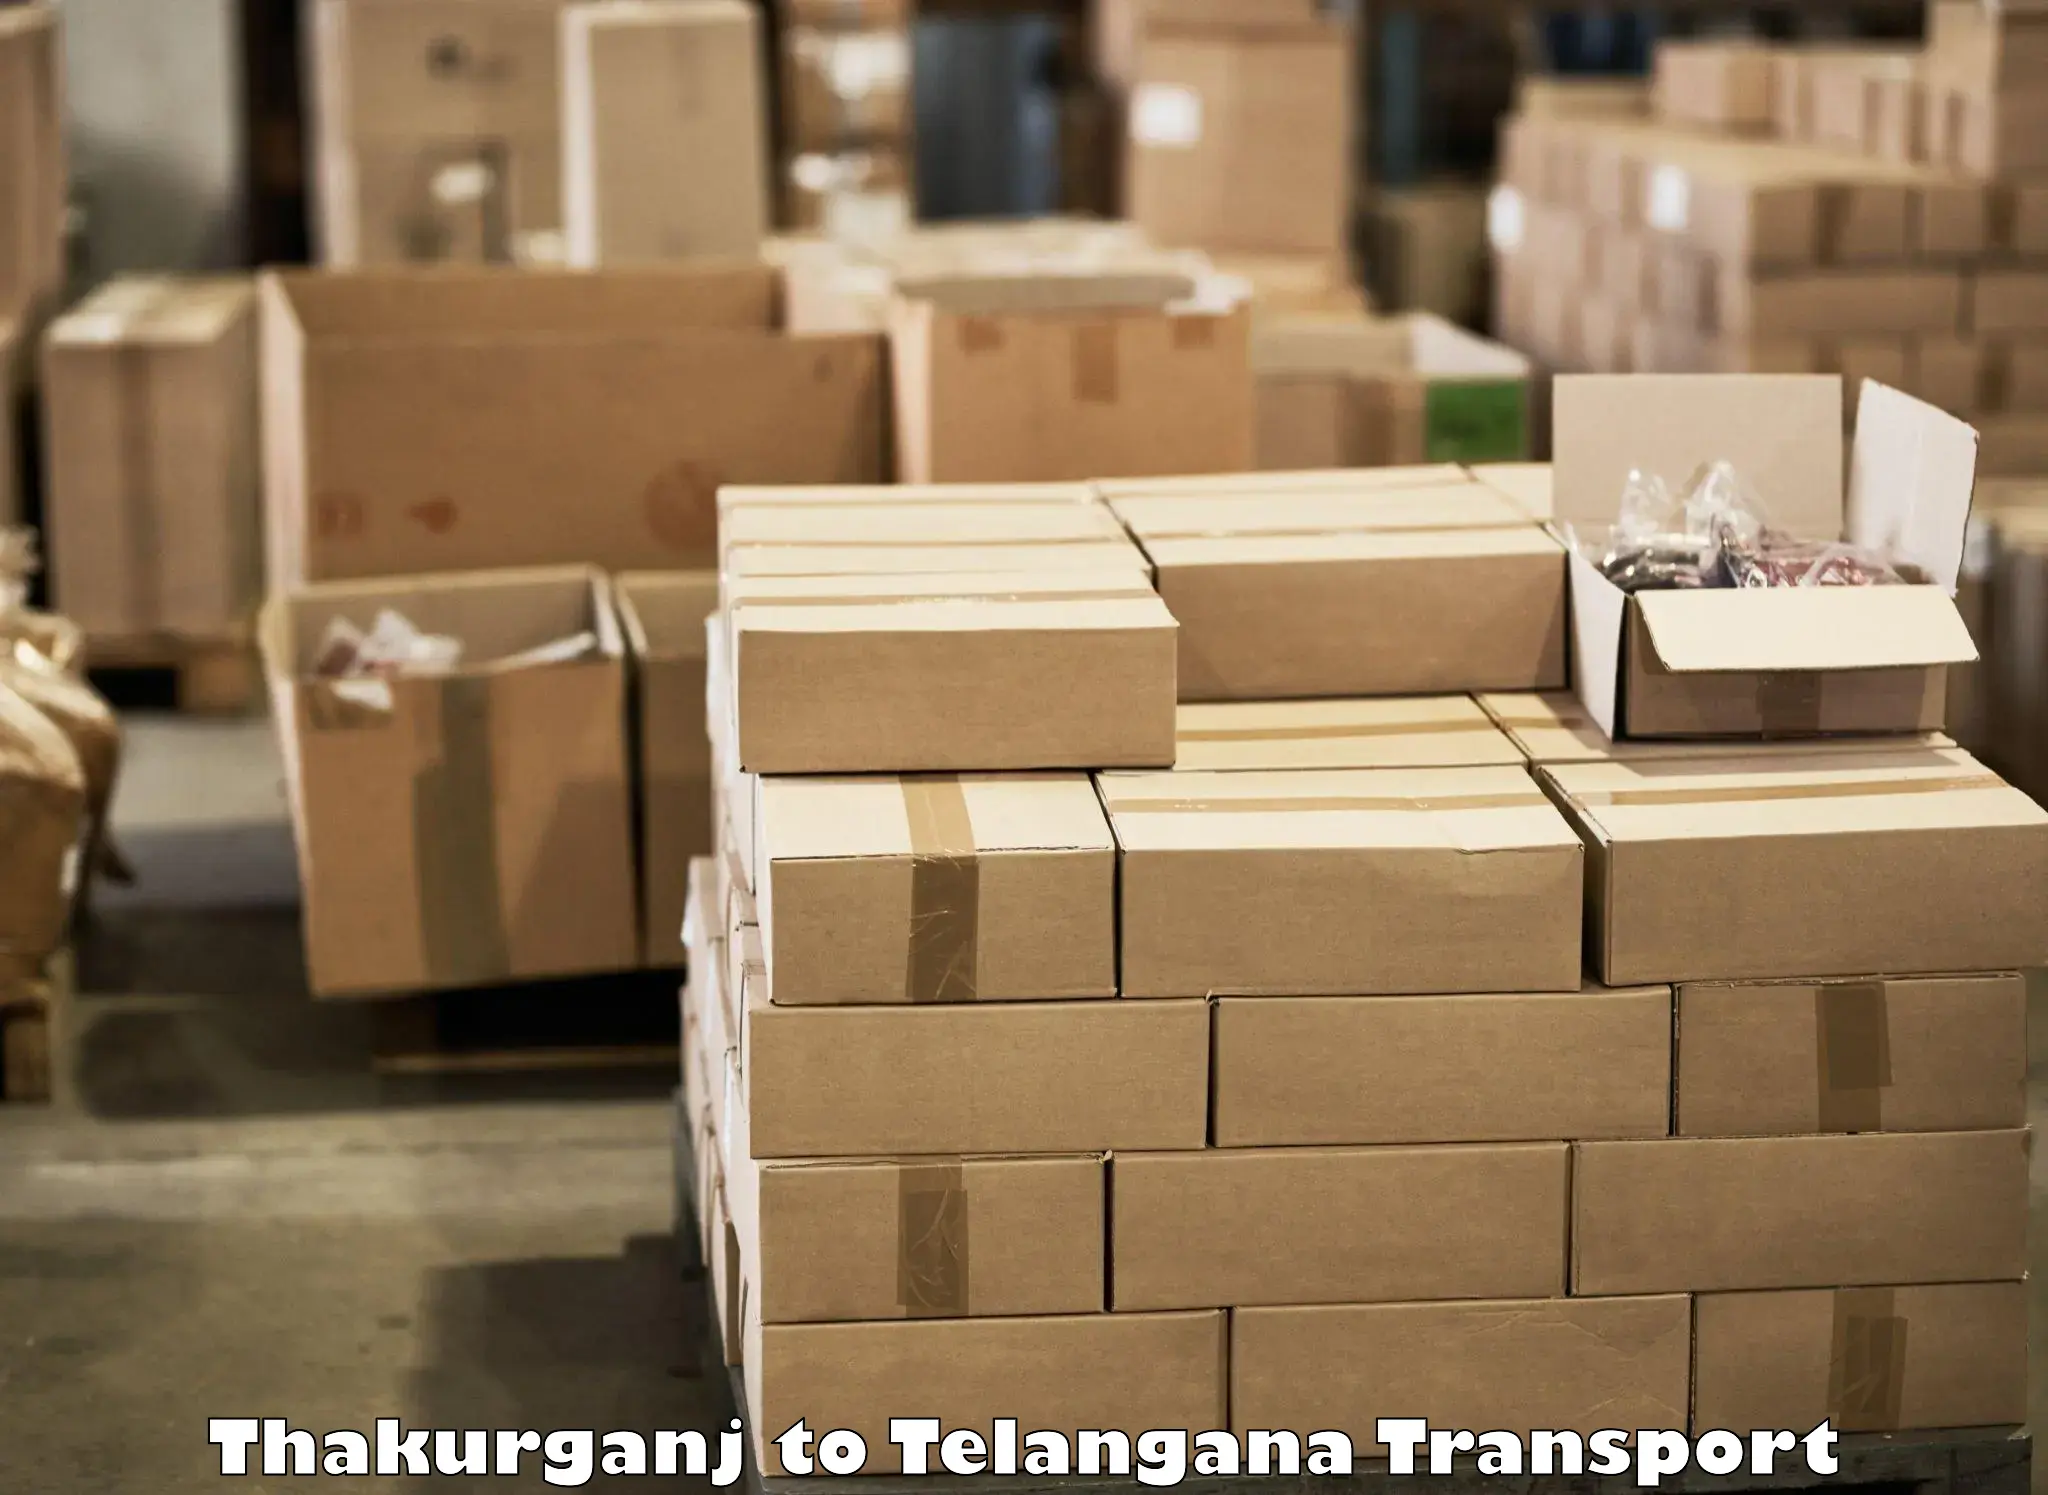 Goods delivery service Thakurganj to Sathupally